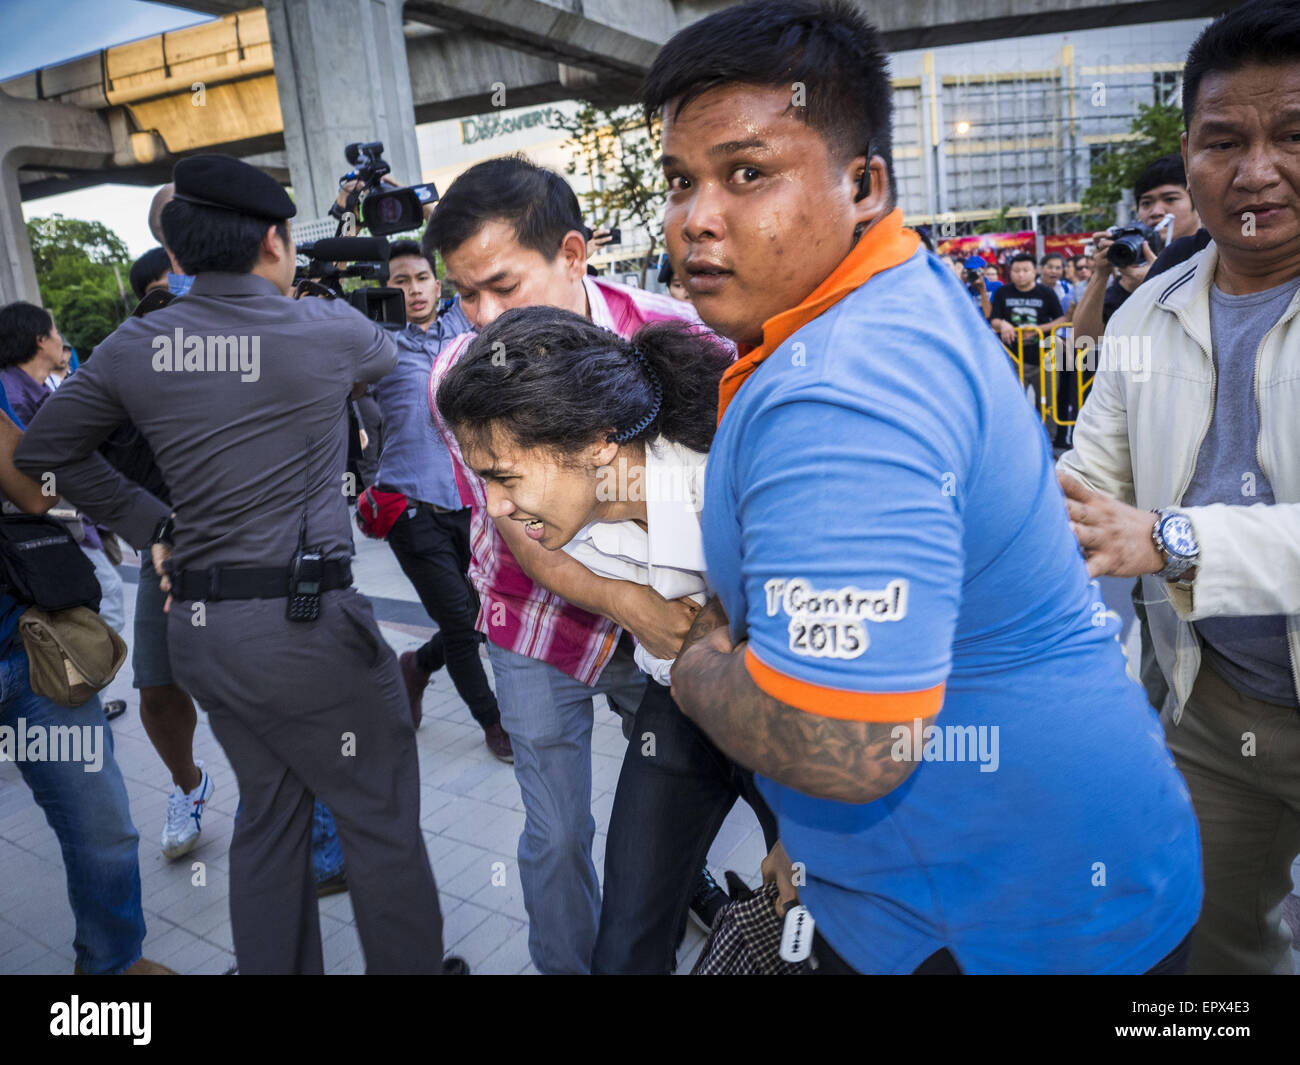 Bangkok, Bangkok, Thailand. 22nd May, 2015. Thai police scuffle with and arrest anti-coup protestors in front of the Bangkok Art and Culture Centre. The Thai military seized power in a coup on May 22, 2014. There were small protests throughout Bangkok Friday to mark the first anniversary of the coup. Police arrested protestors at several locations. The most serious protest was at Bangkok Art and Culture Centre (BACC) where about 100 protestors, mostly students, faced off against police for several hours. Credit:  ZUMA Press, Inc./Alamy Live News Stock Photo